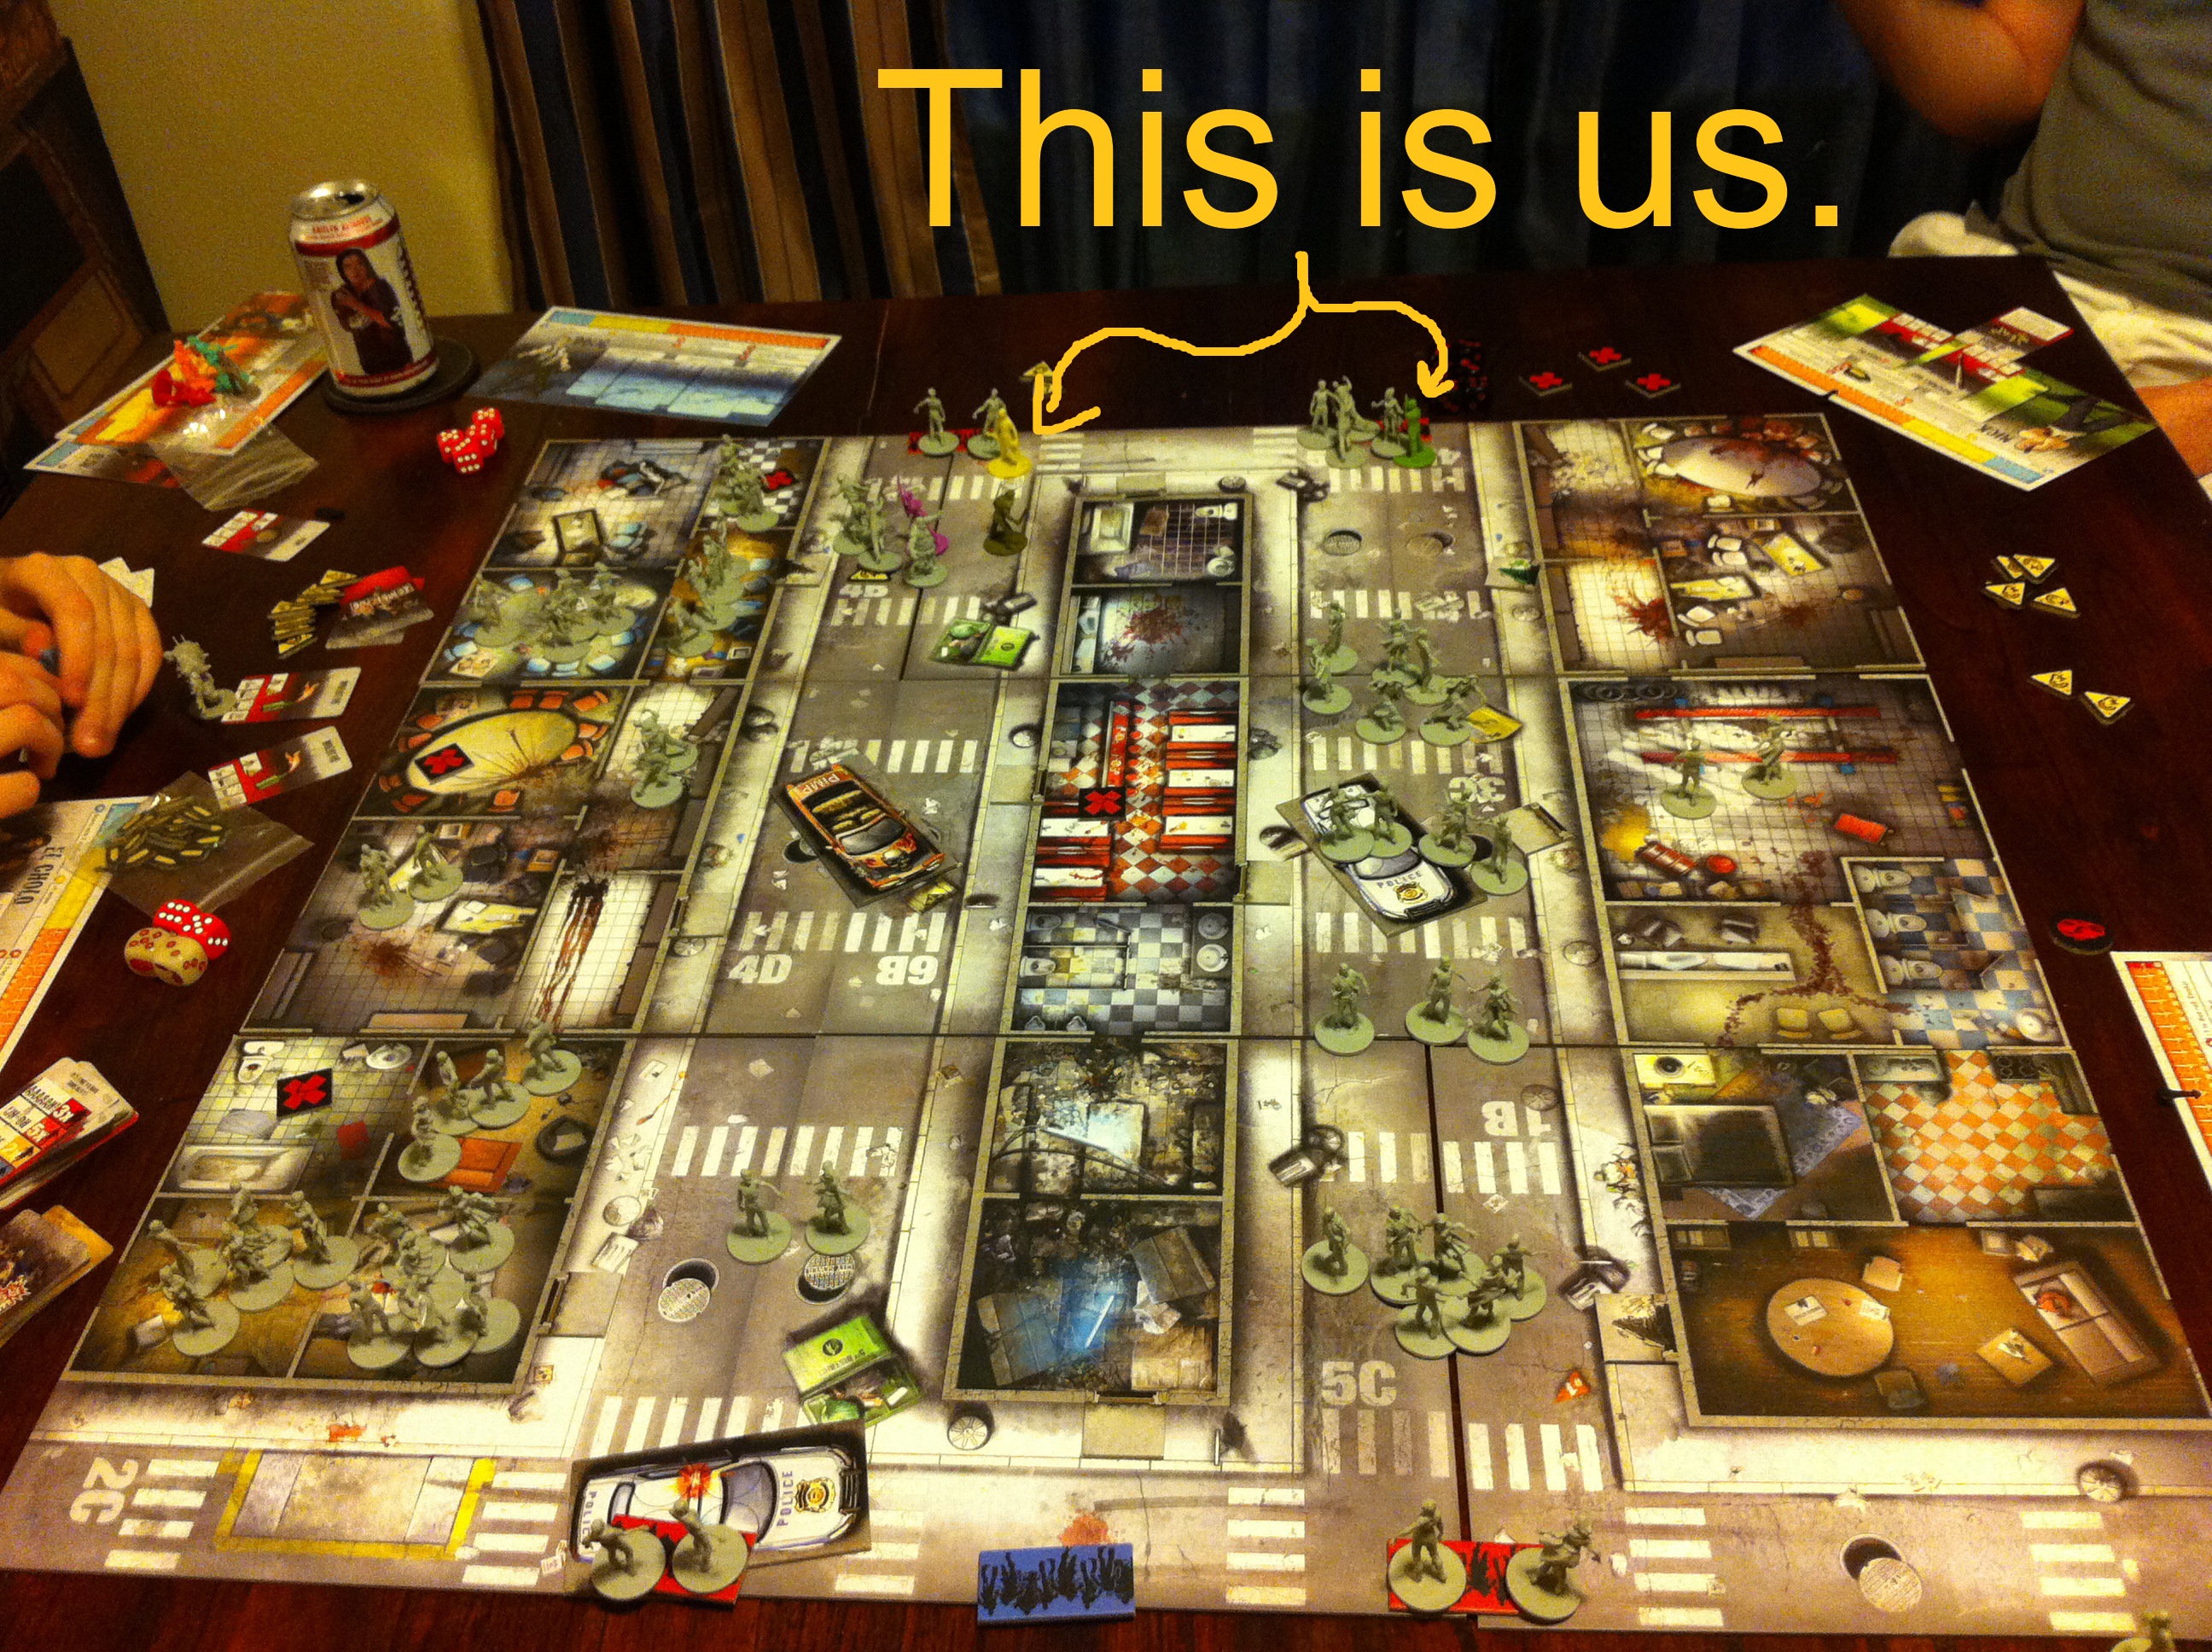 Review: Zombicide